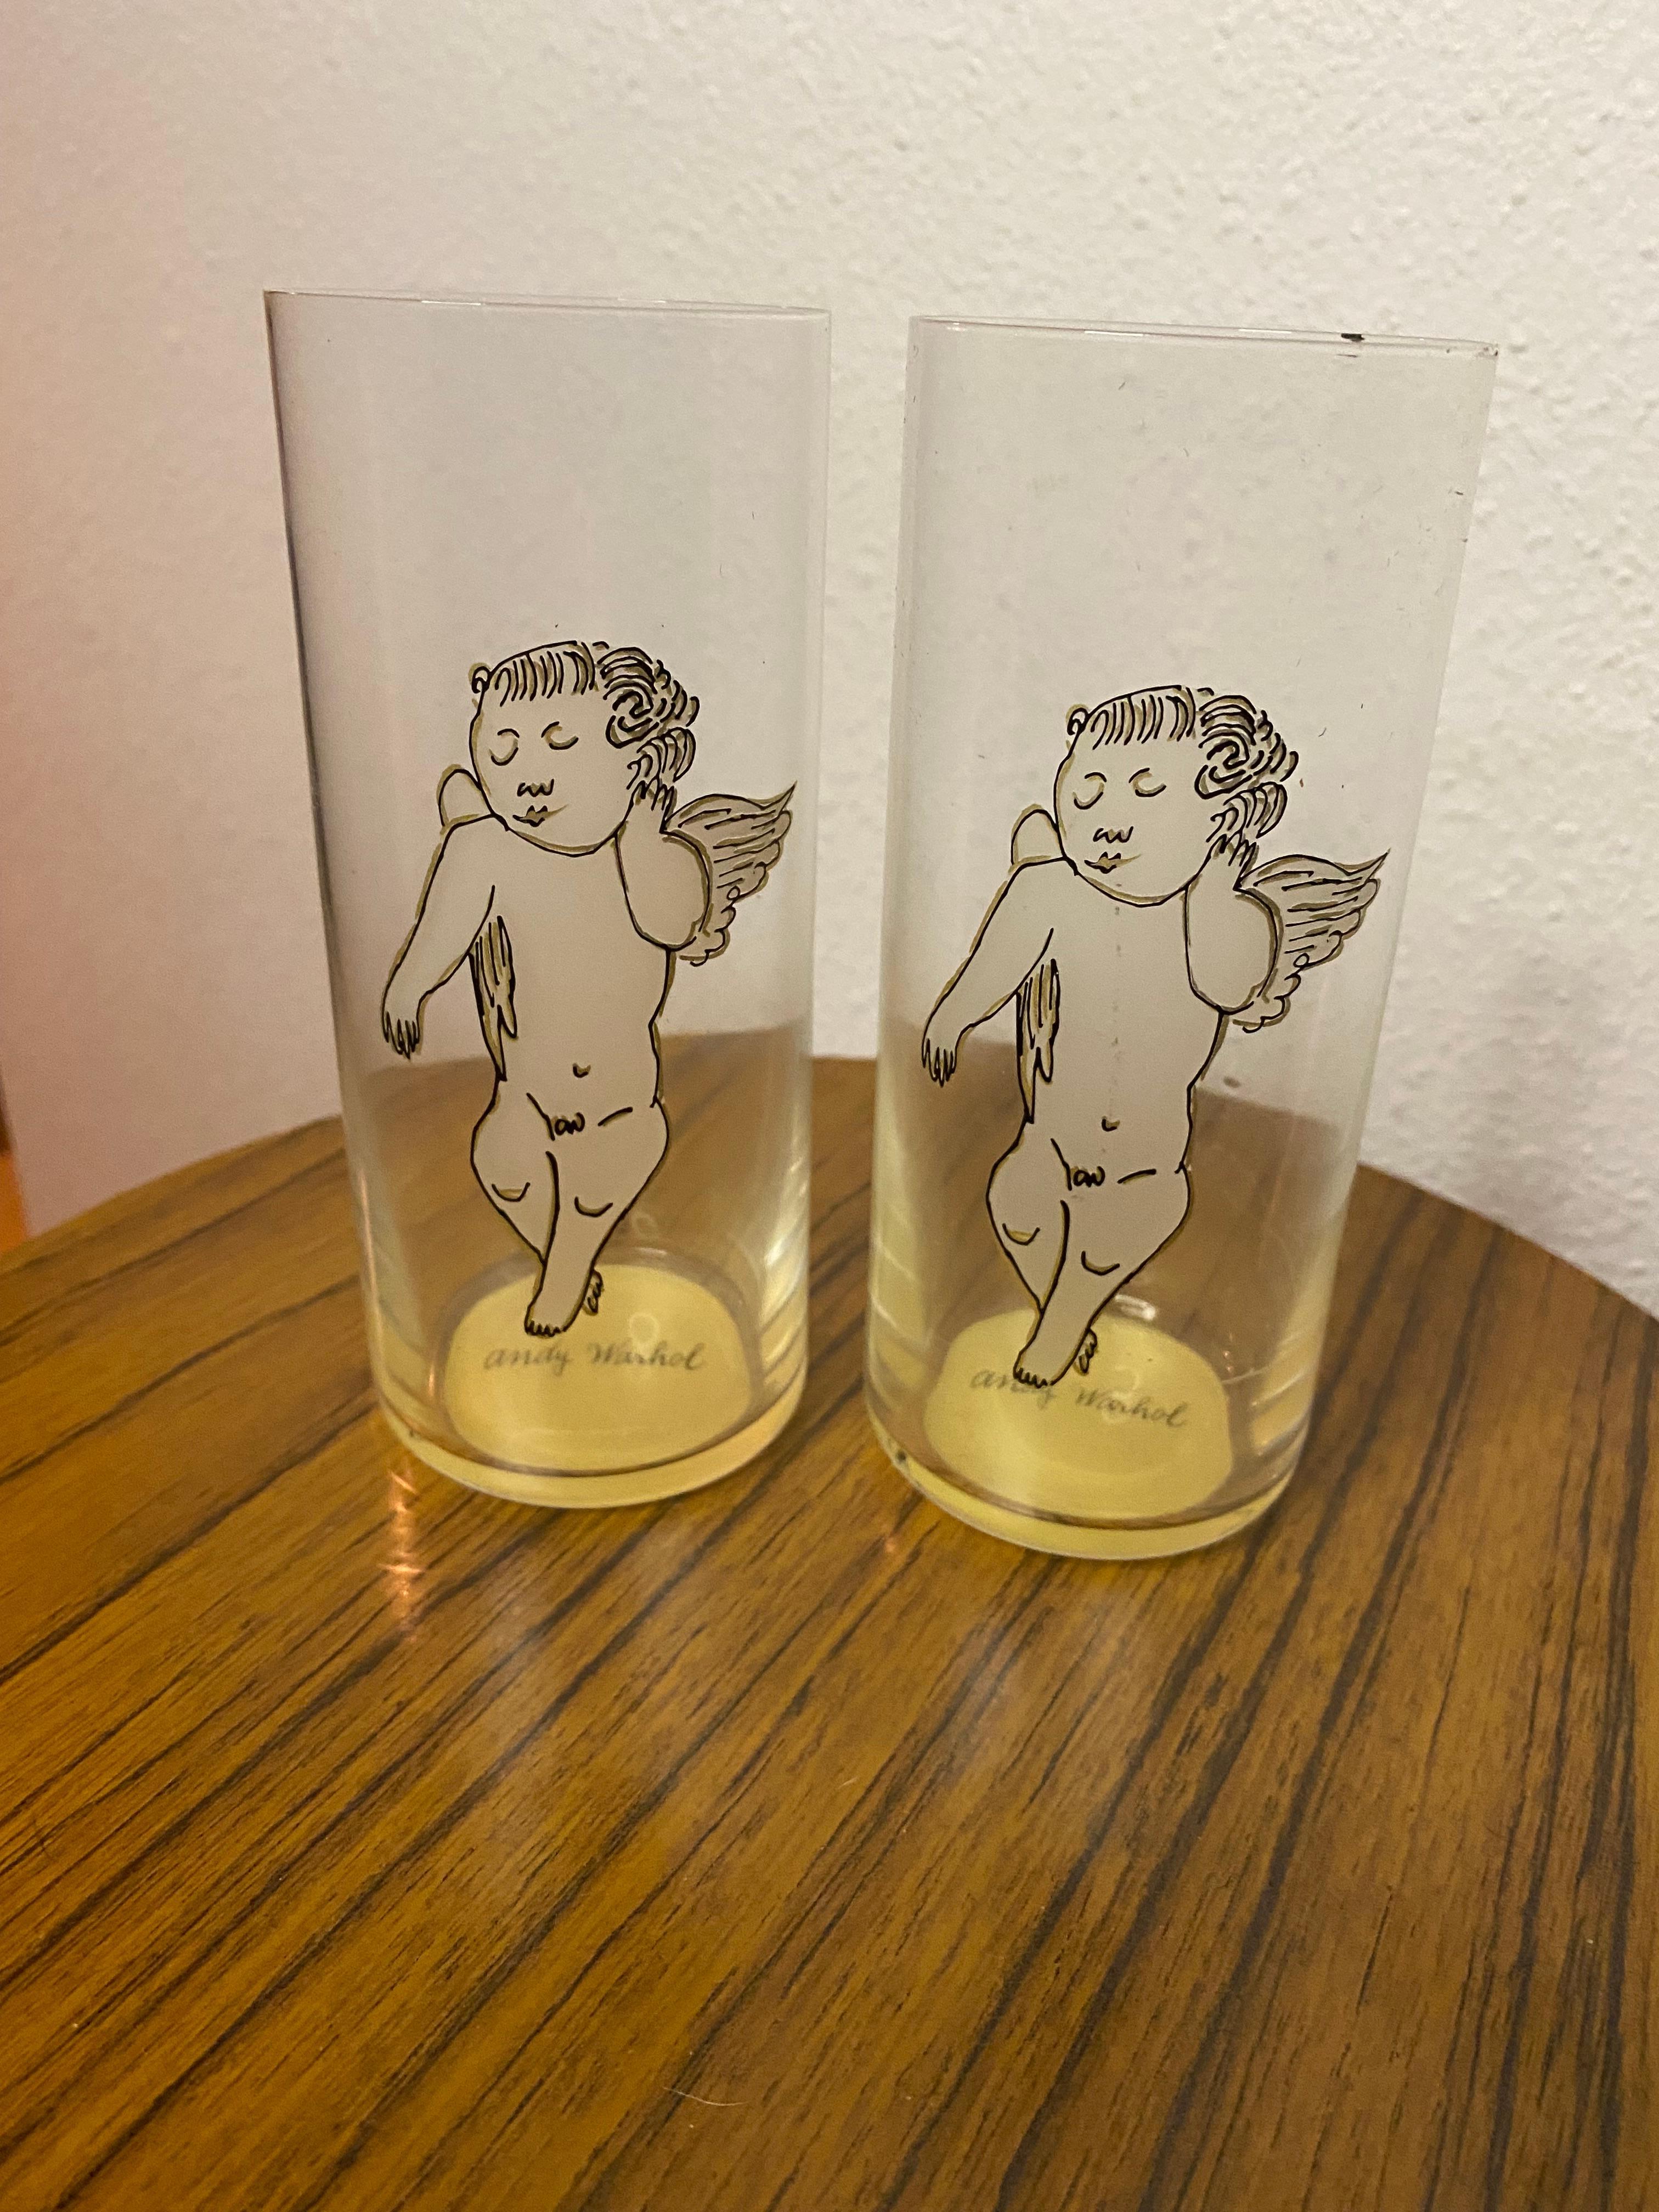 Rosenthal Studio-Line Andy Warhol christmas golden Angels glasses. Andy Warhol, quite possibly the greatest pop art artist of our time, loved Christmas and was known for giving his friends paintings of cupids as gifts. These particular cupids now